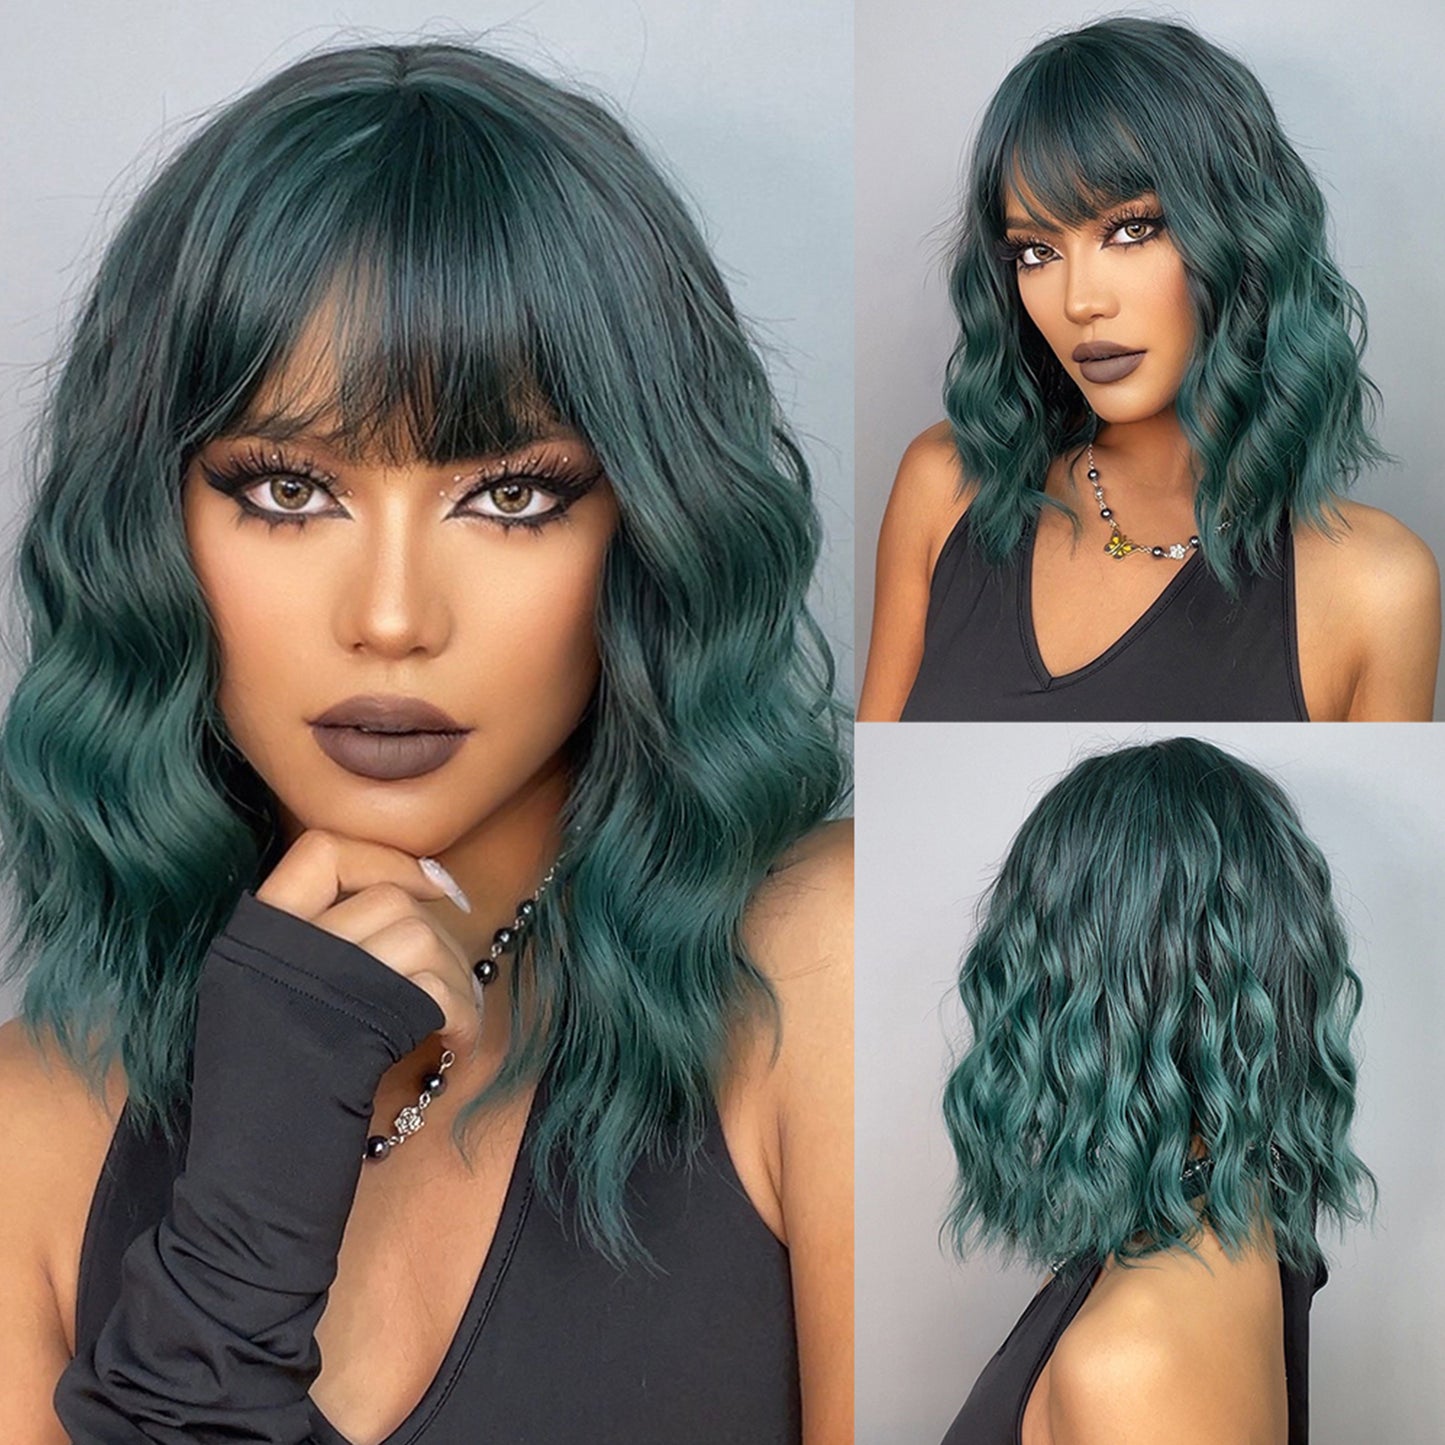 【Giselle】Loxology | 16 Inch Green Ombre Wavy BOB wigs for Women for Daily Life Use